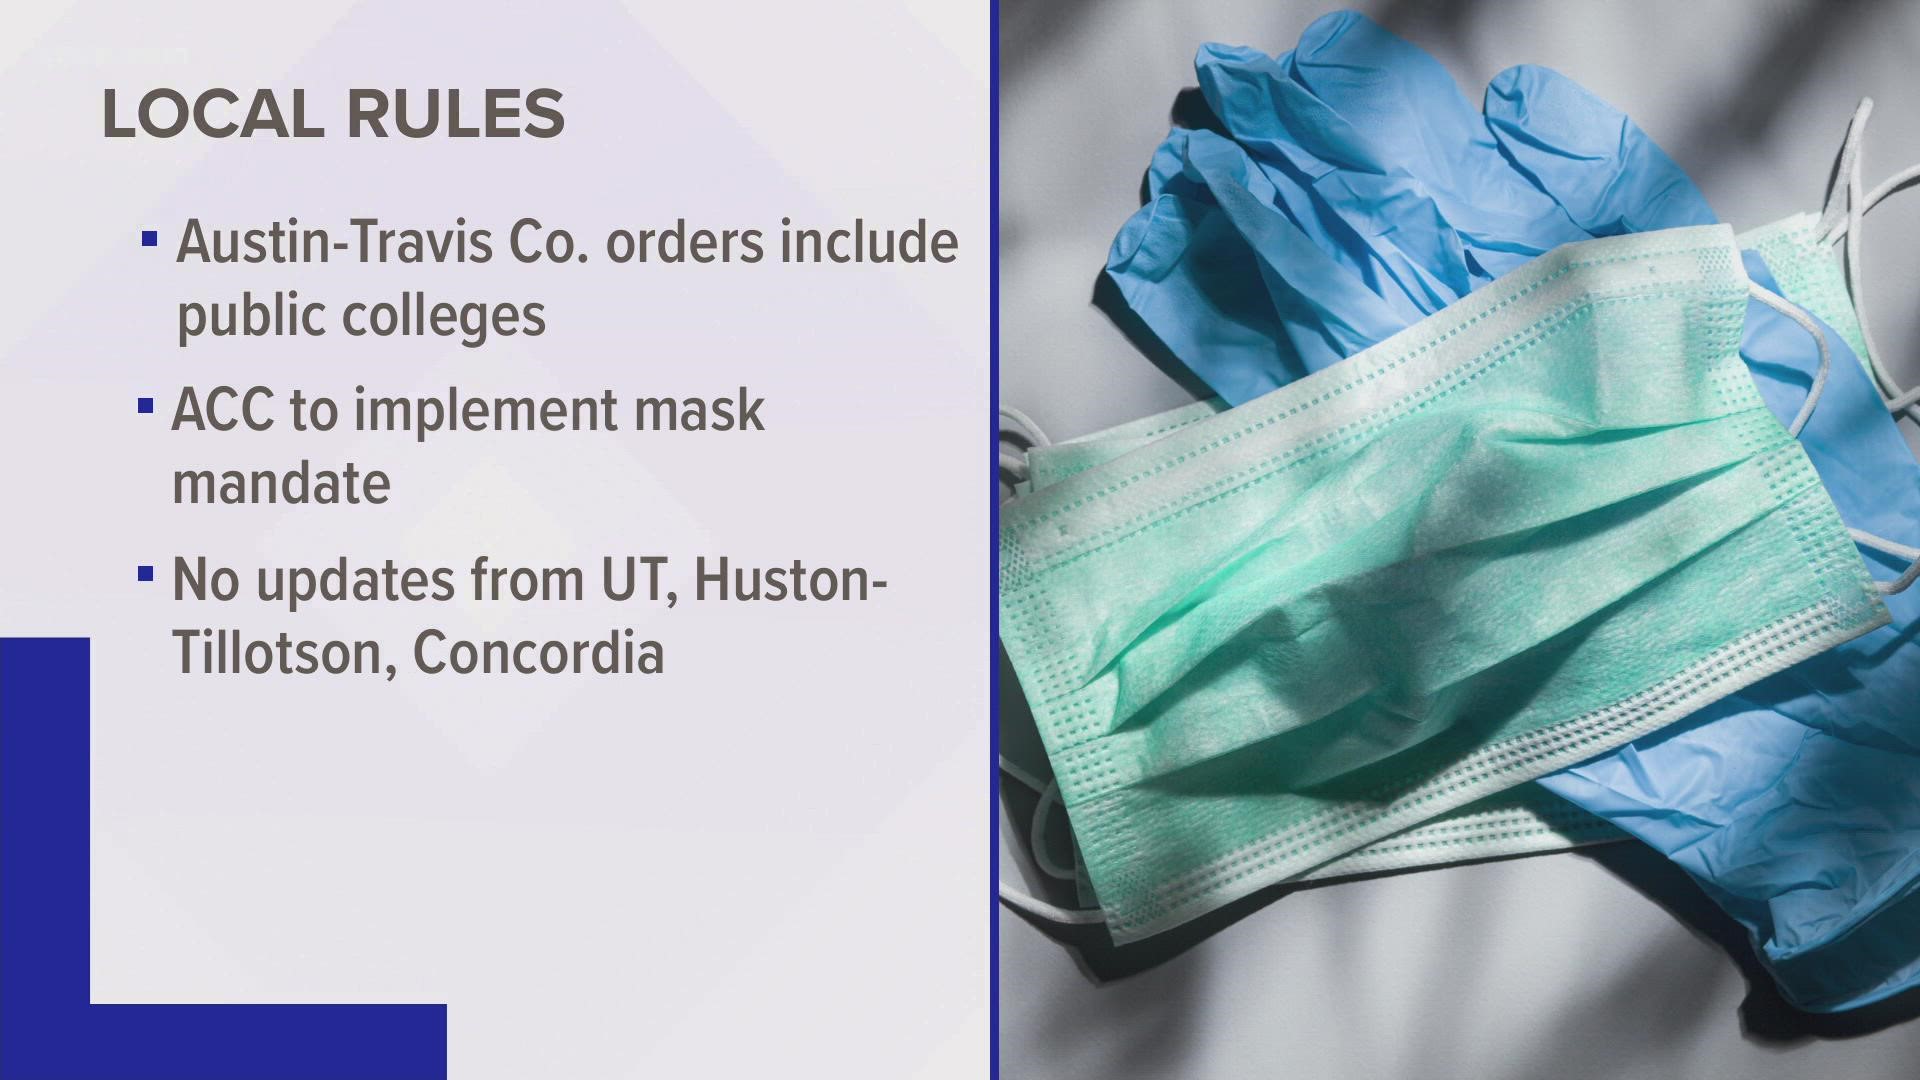 Effective August 20, ACC will require anyone age two or older to wear a face mask in all buildings.